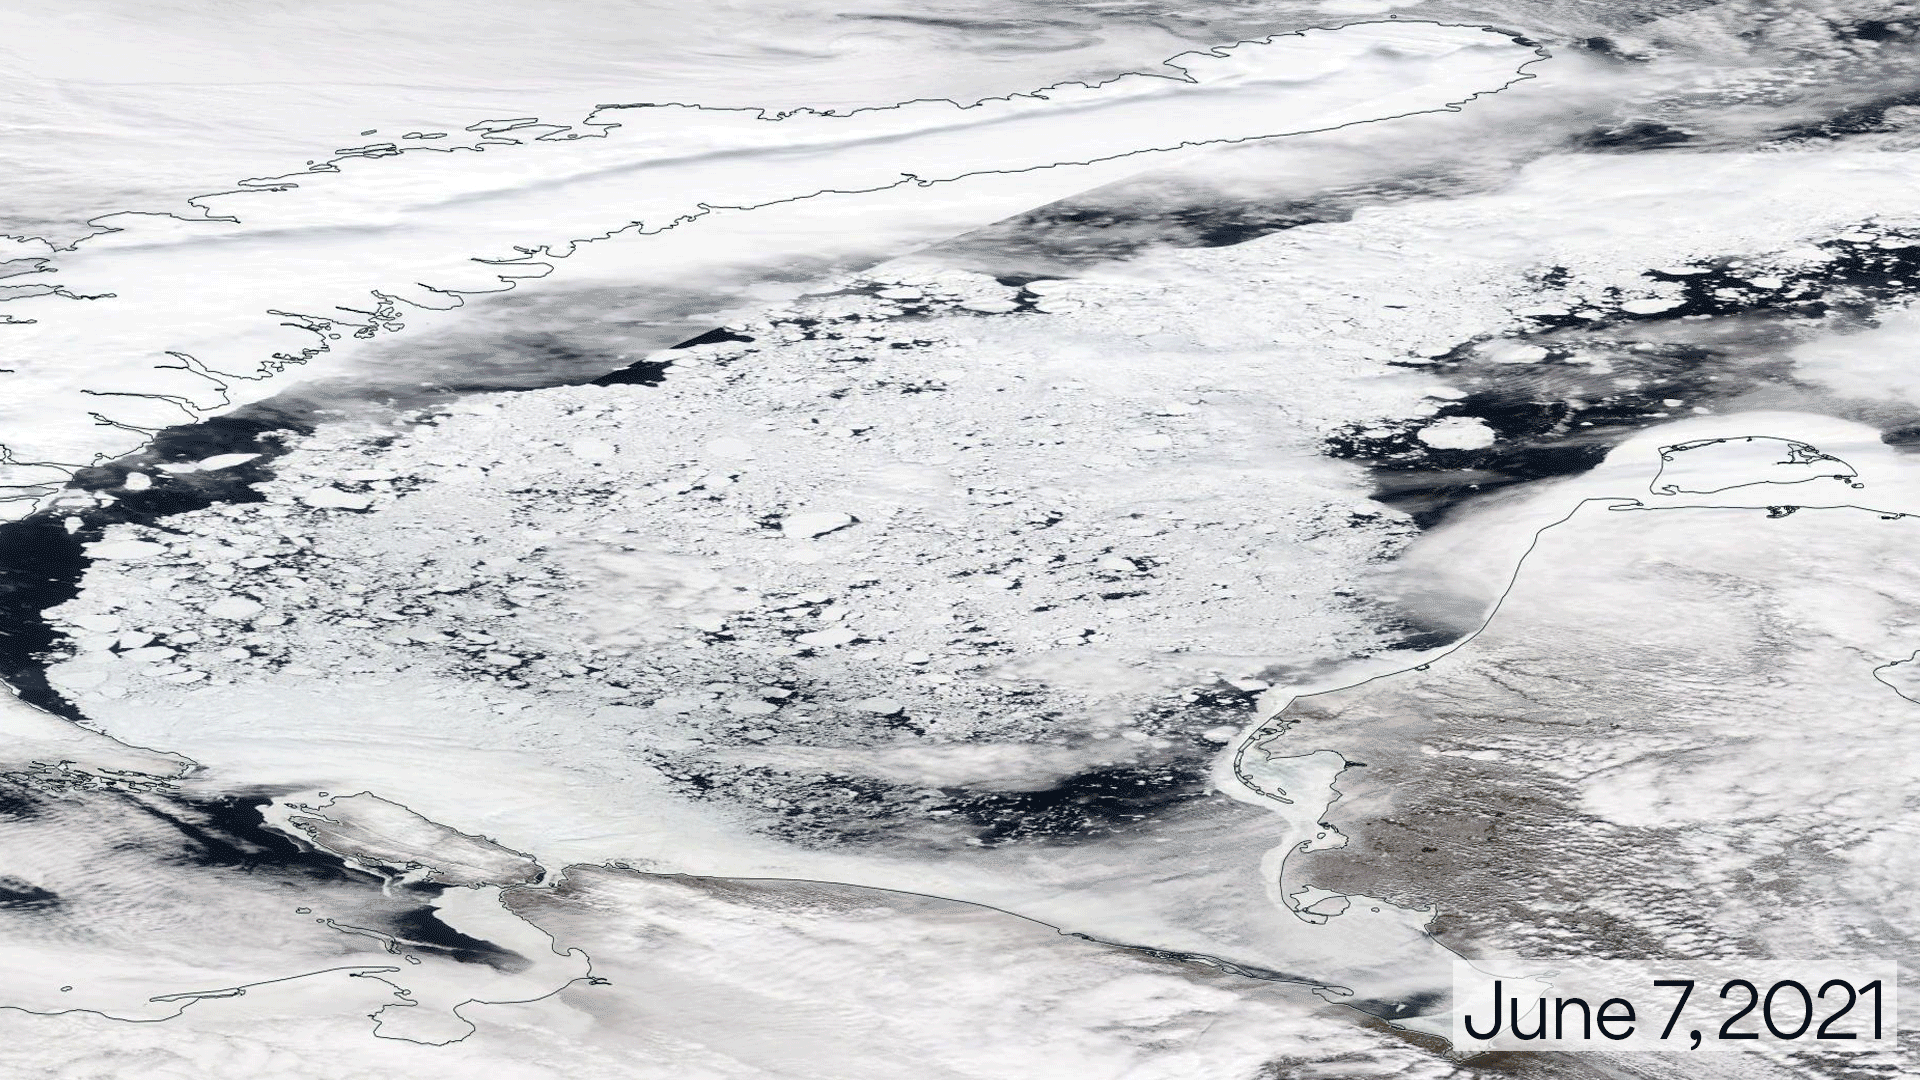 Sea ice disappears from the Laptev Sea north of Russia in June 2021.